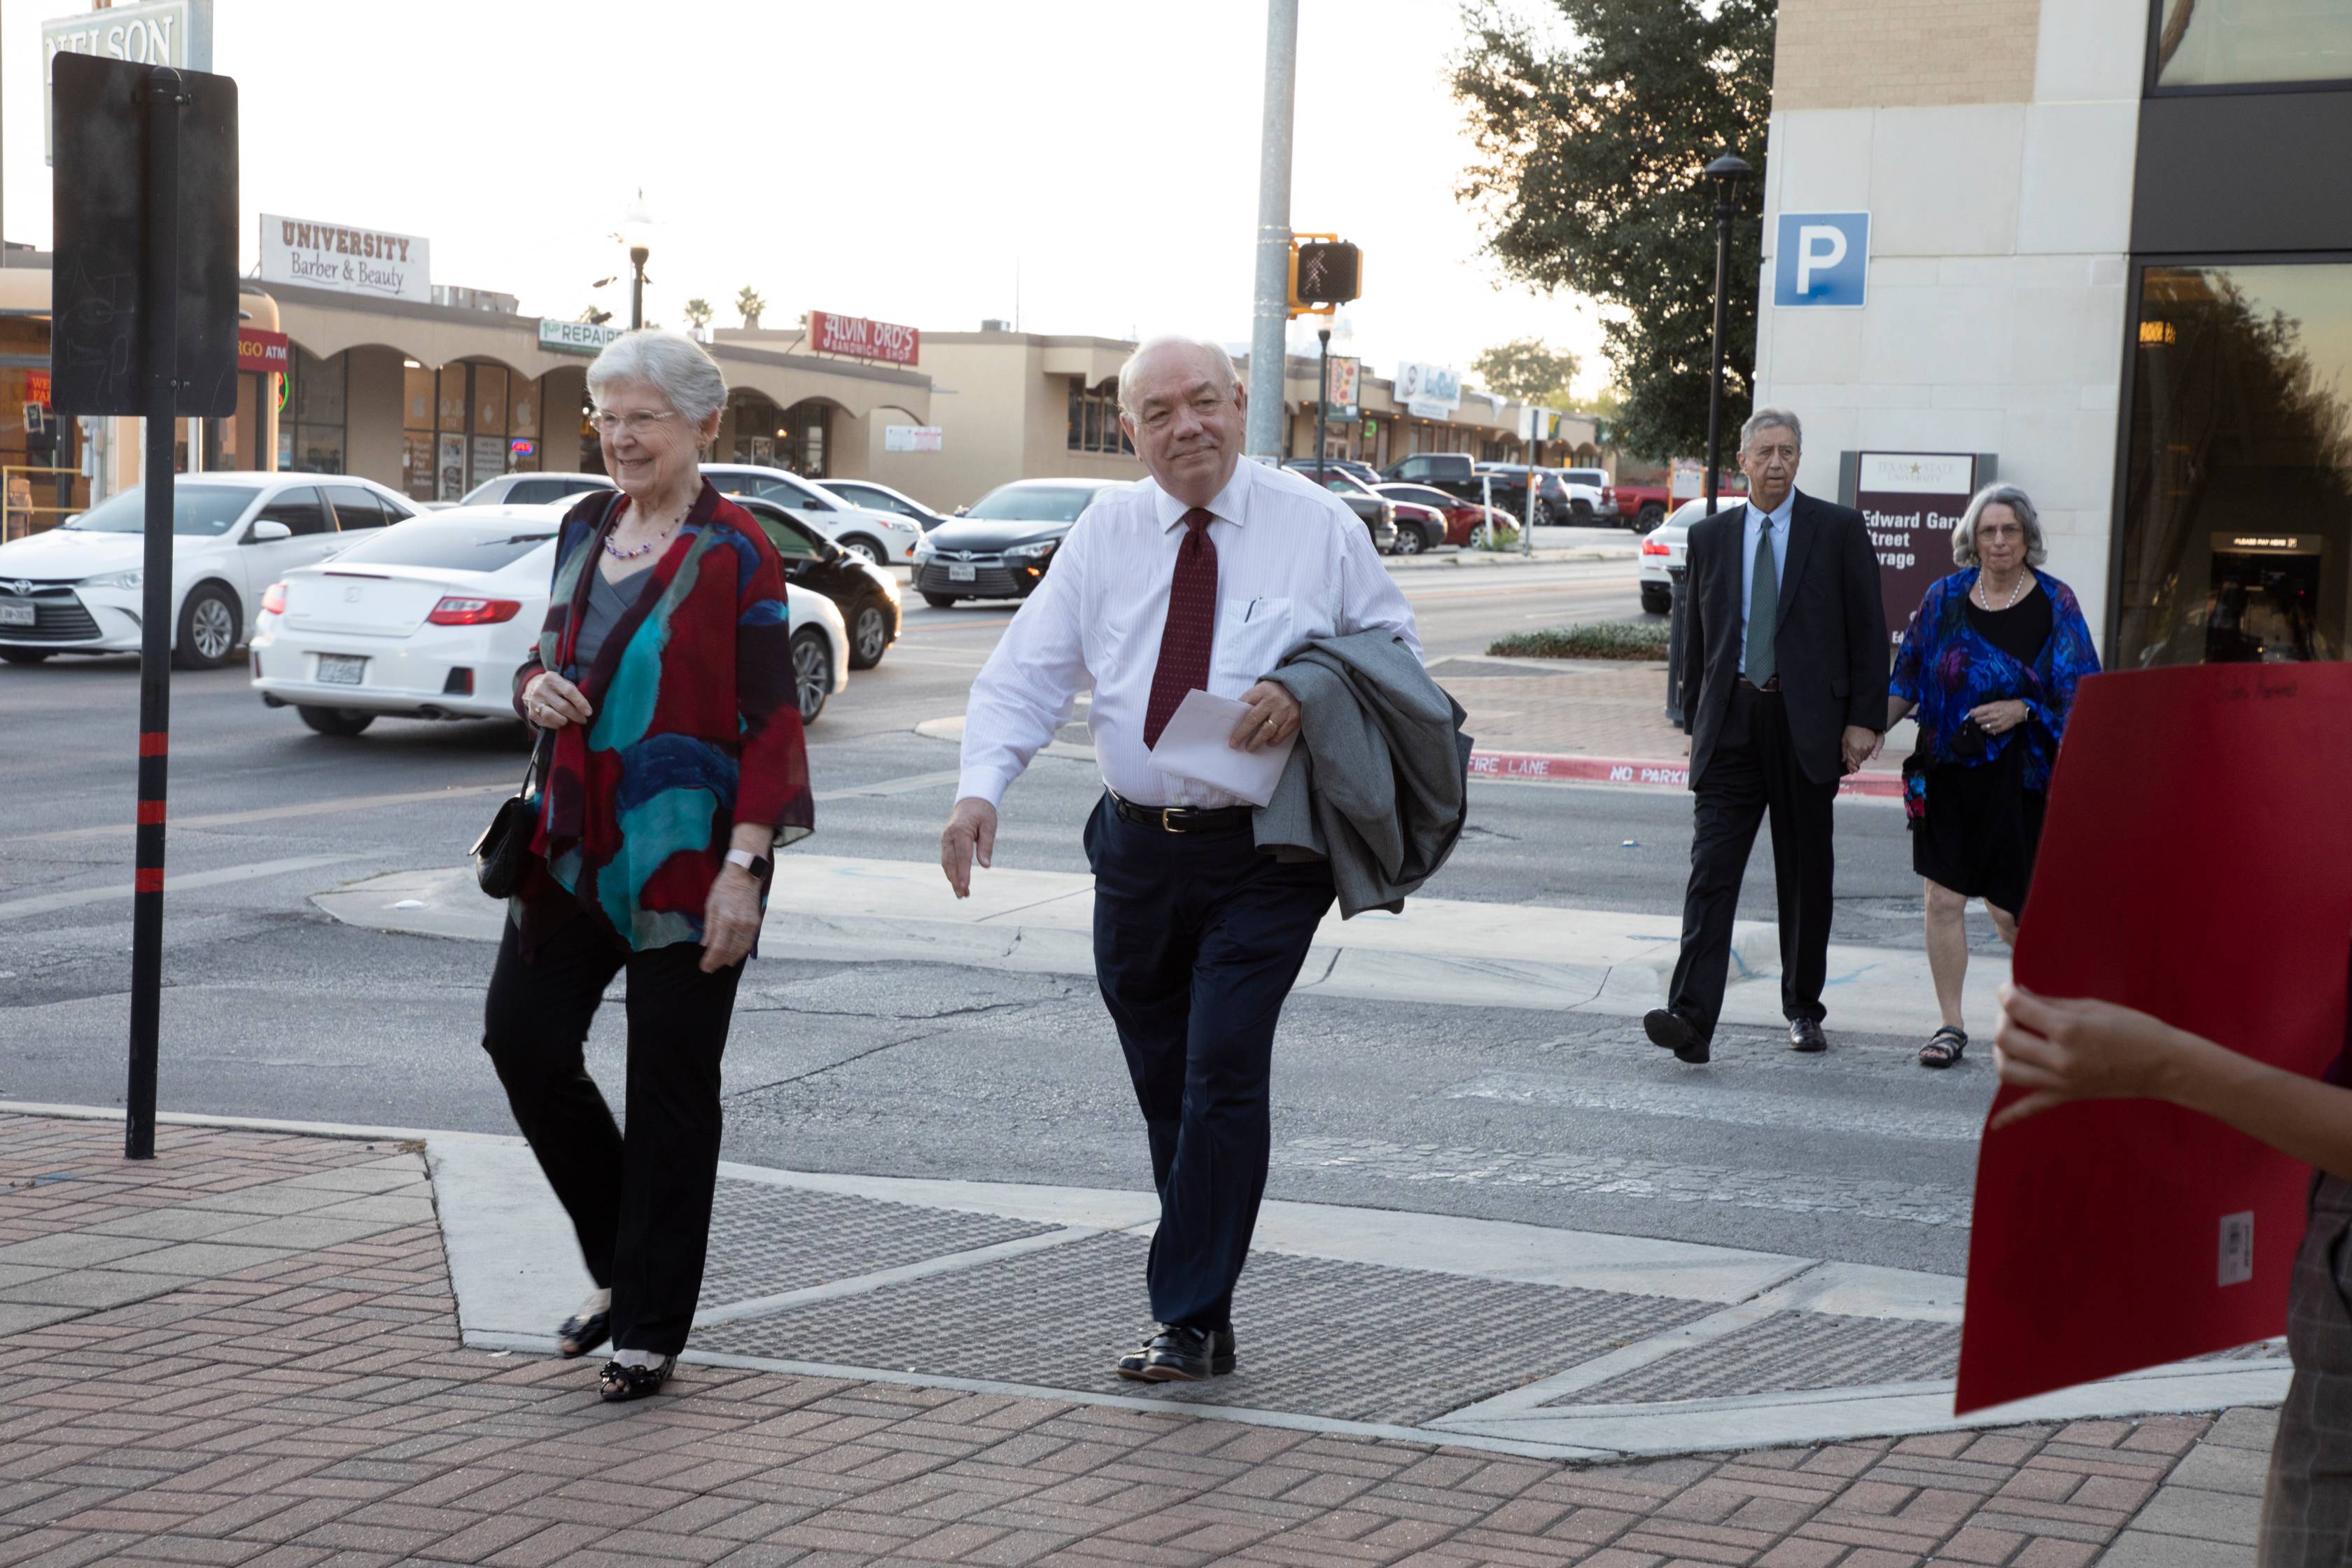 Donors walking to performing art center